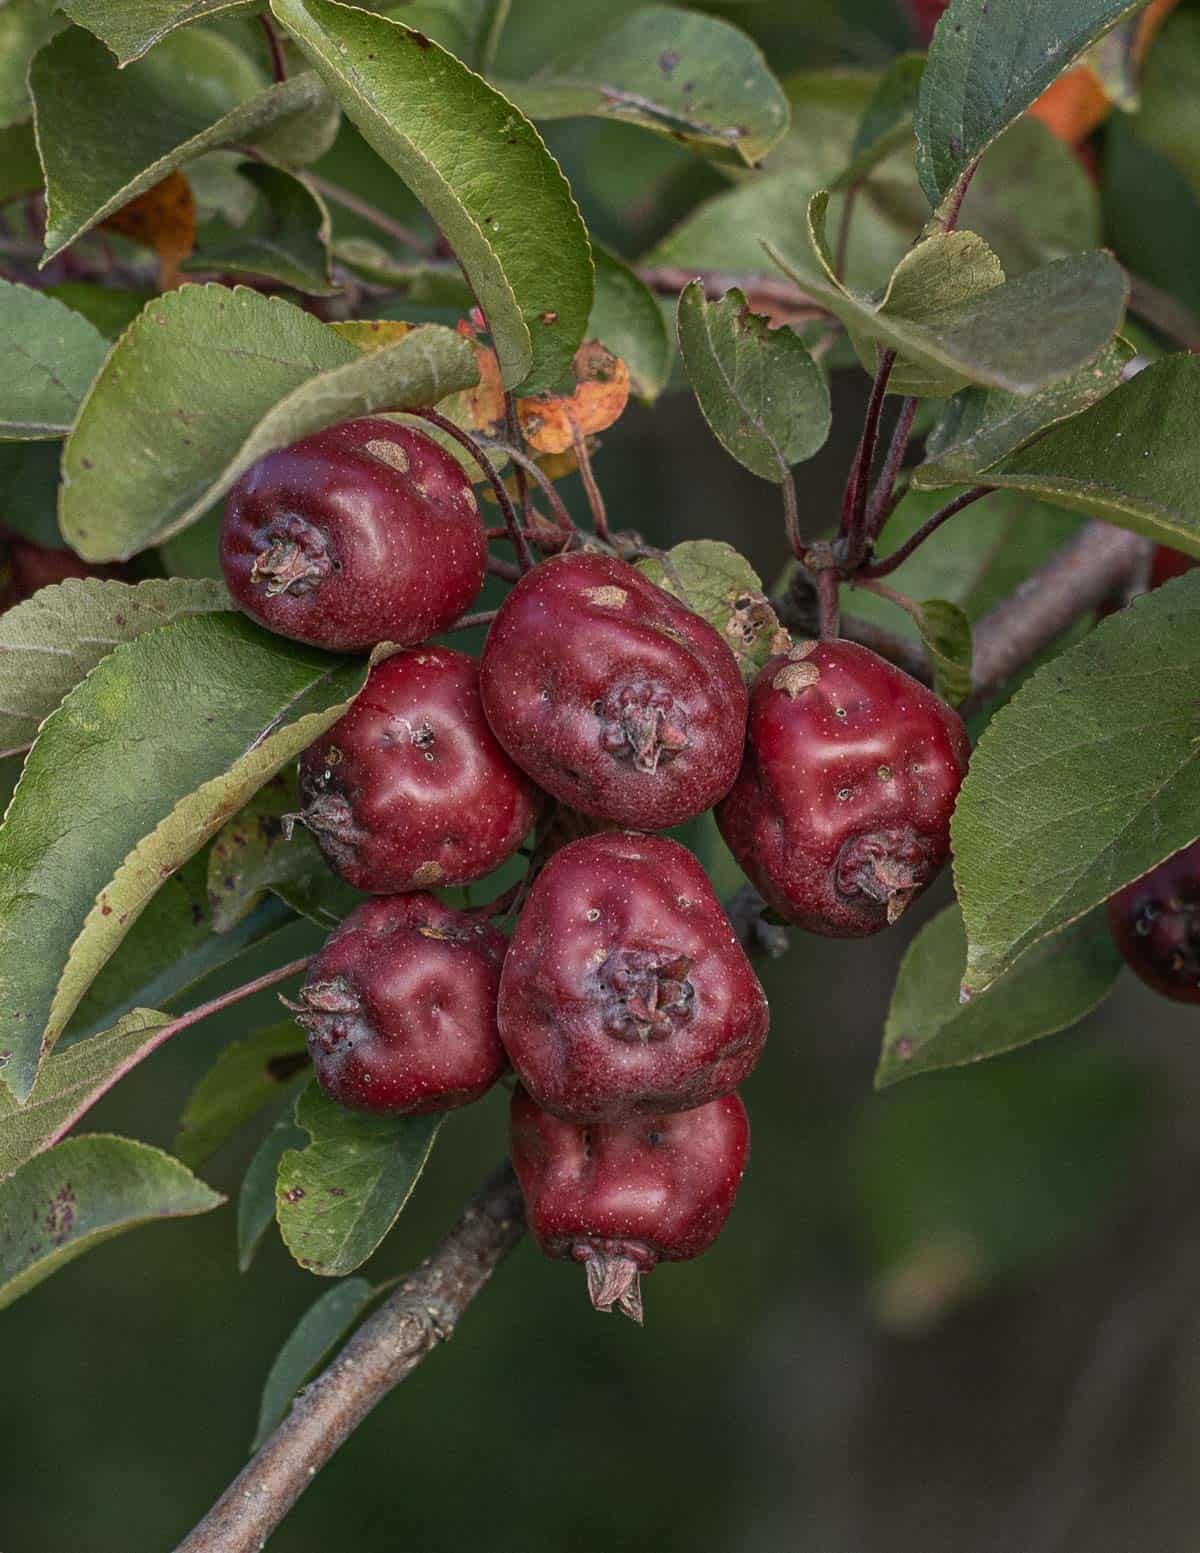 Red dolgo crabapples on a tree (Malus domestica)